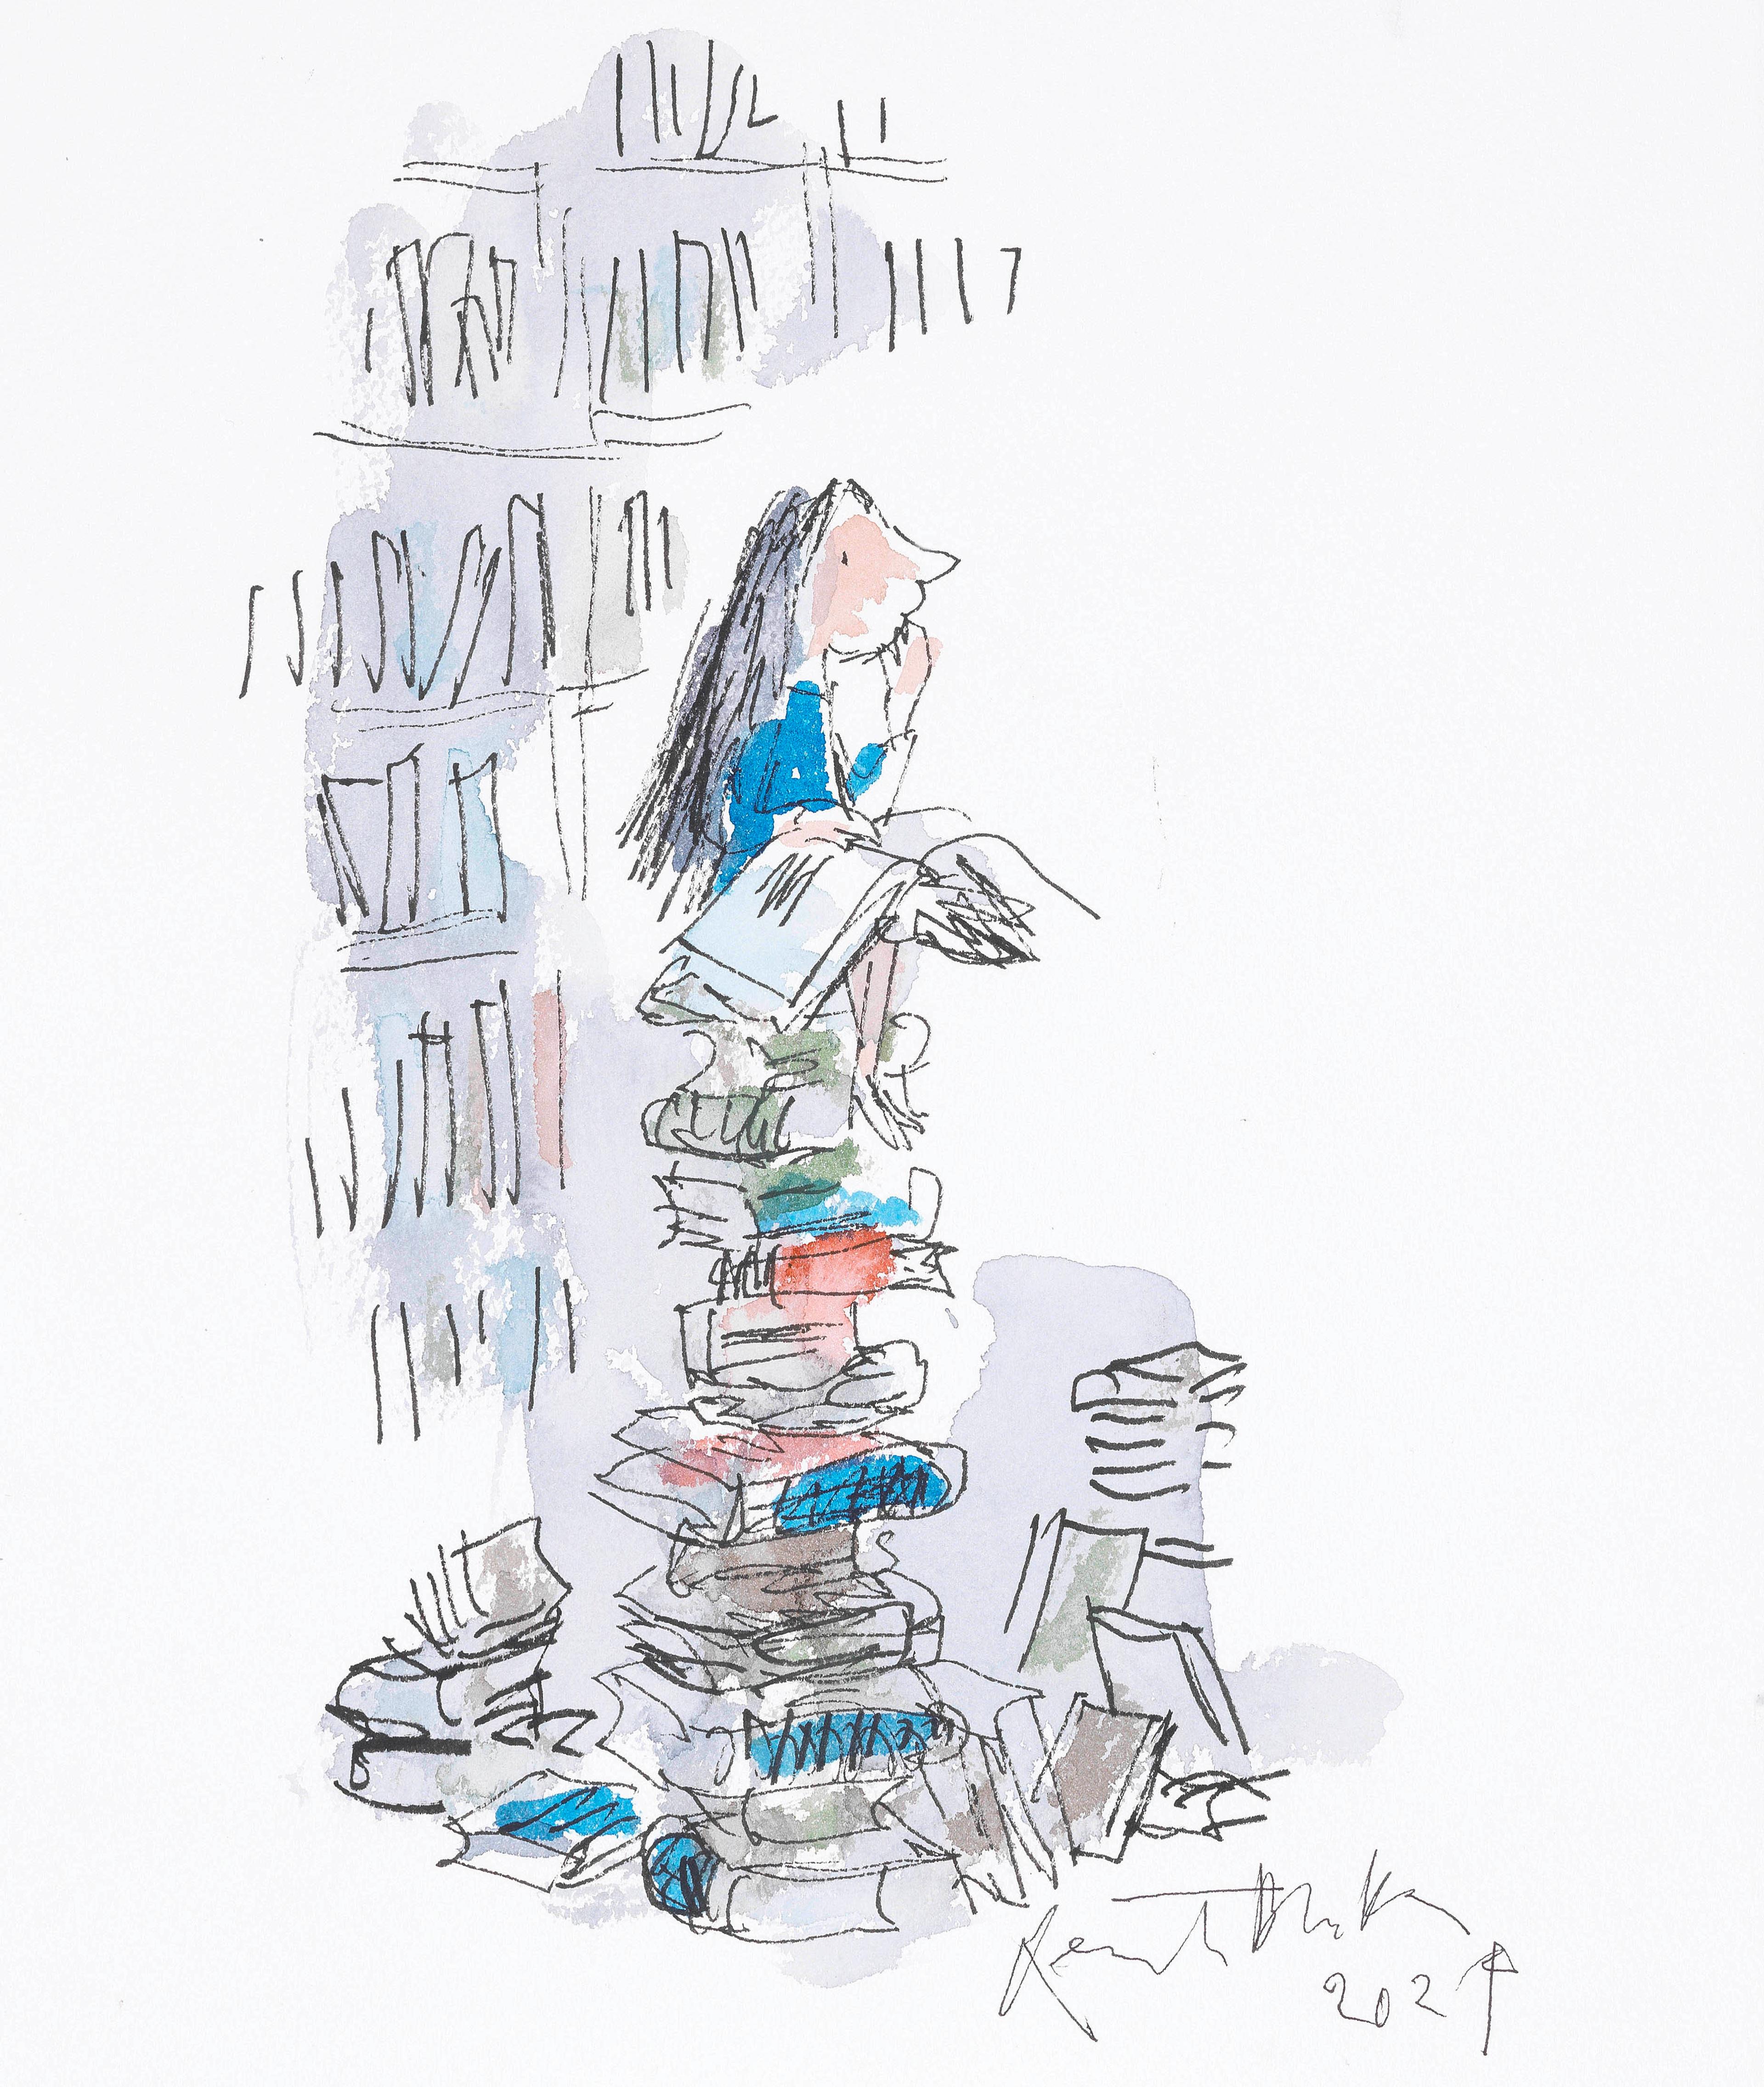 Illustration of a child sitting on top of a pile of books reading a book. Shelves of books are behind them.